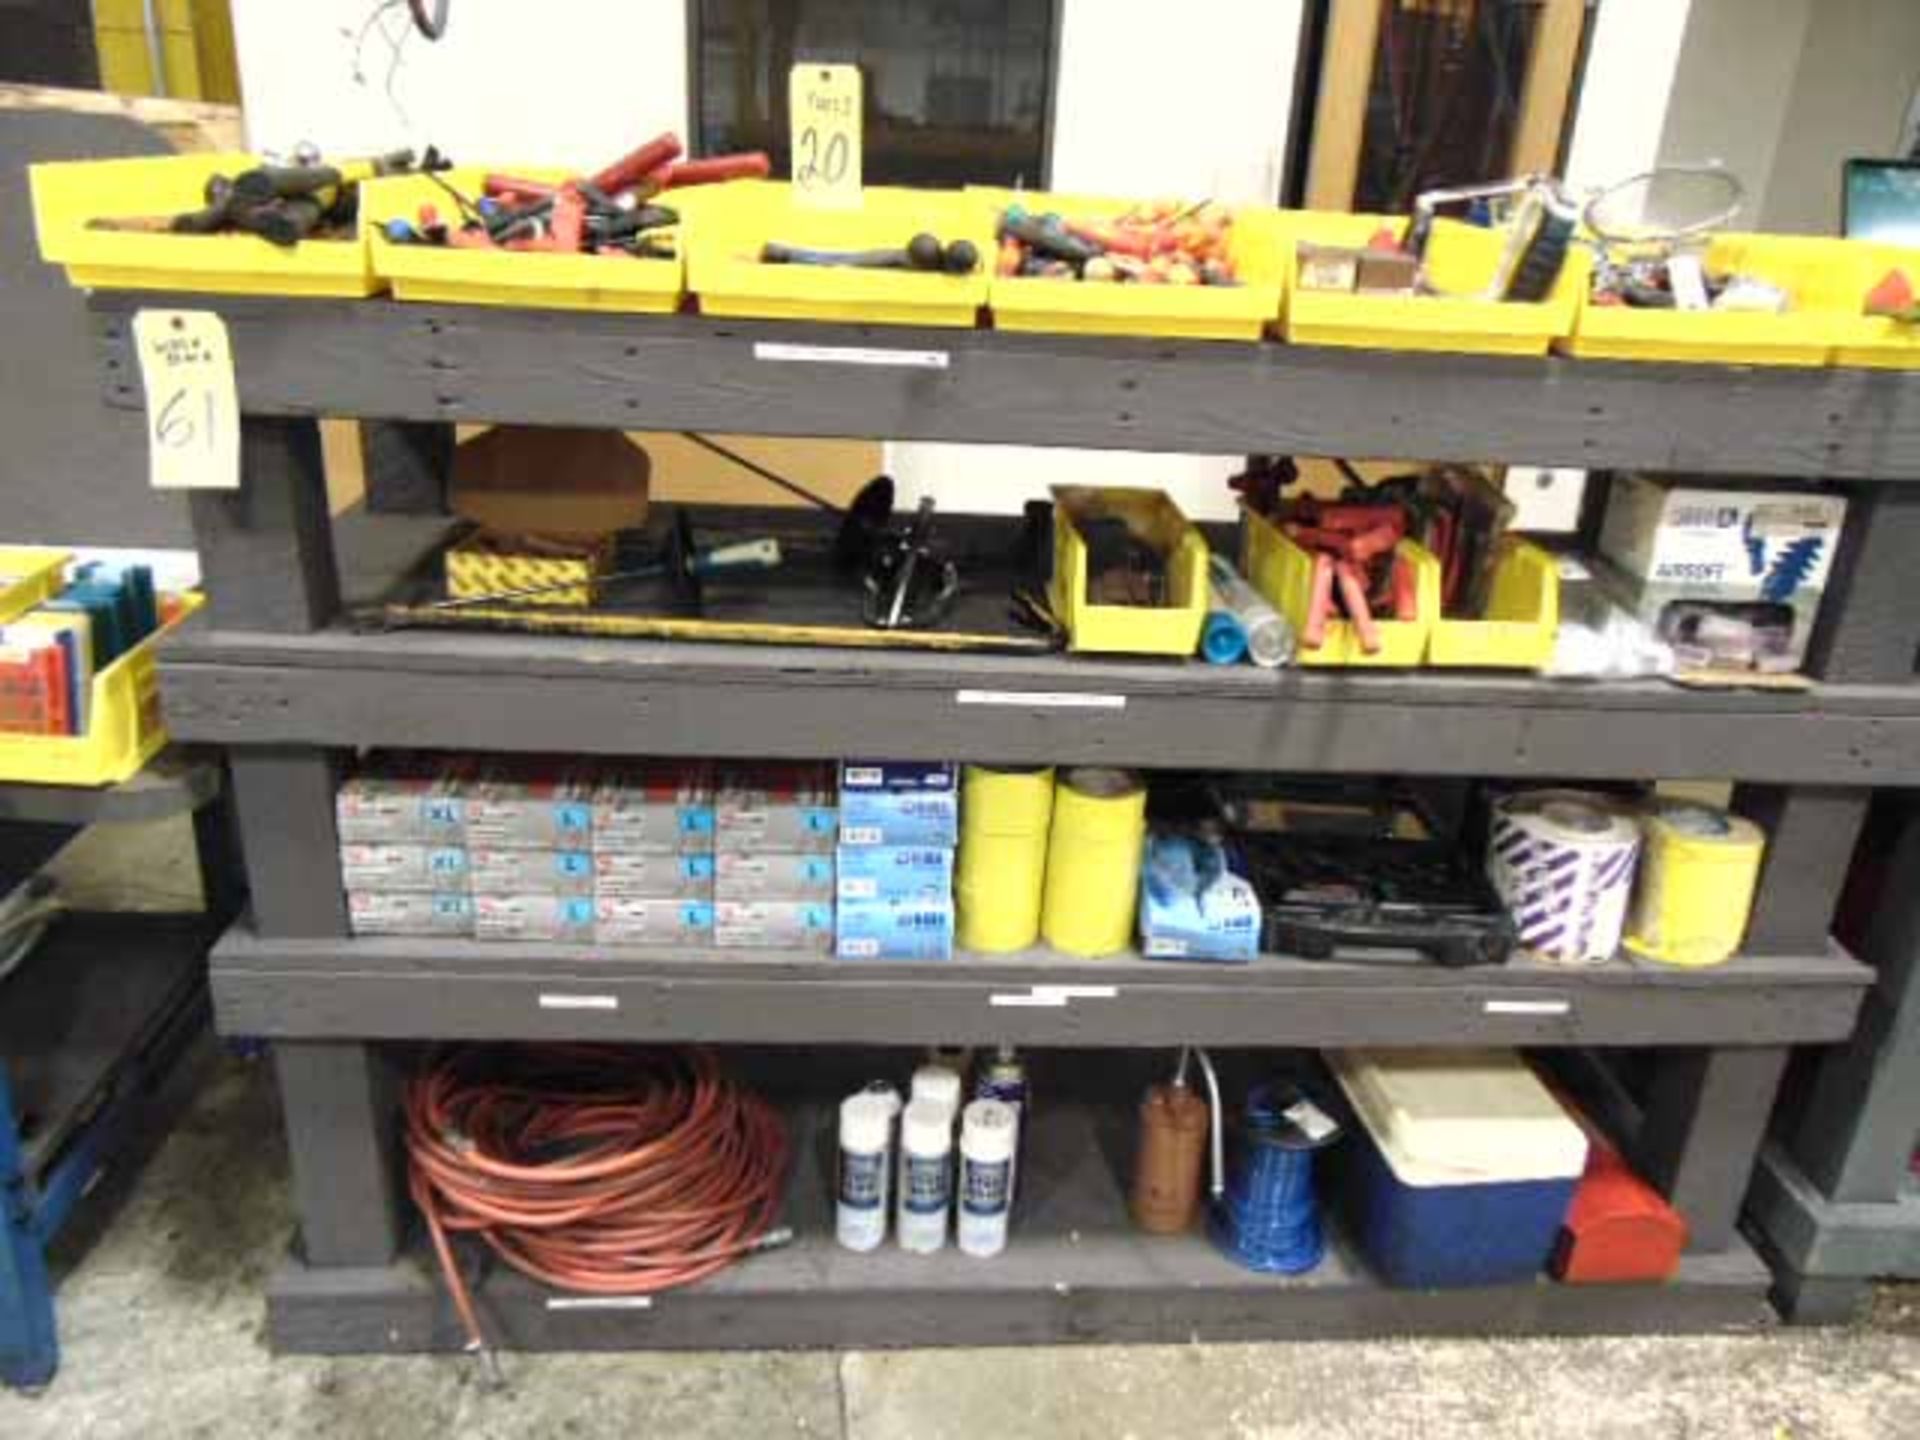 LOT OF HAND TOOLS, assorted (located on rack - rack not included)